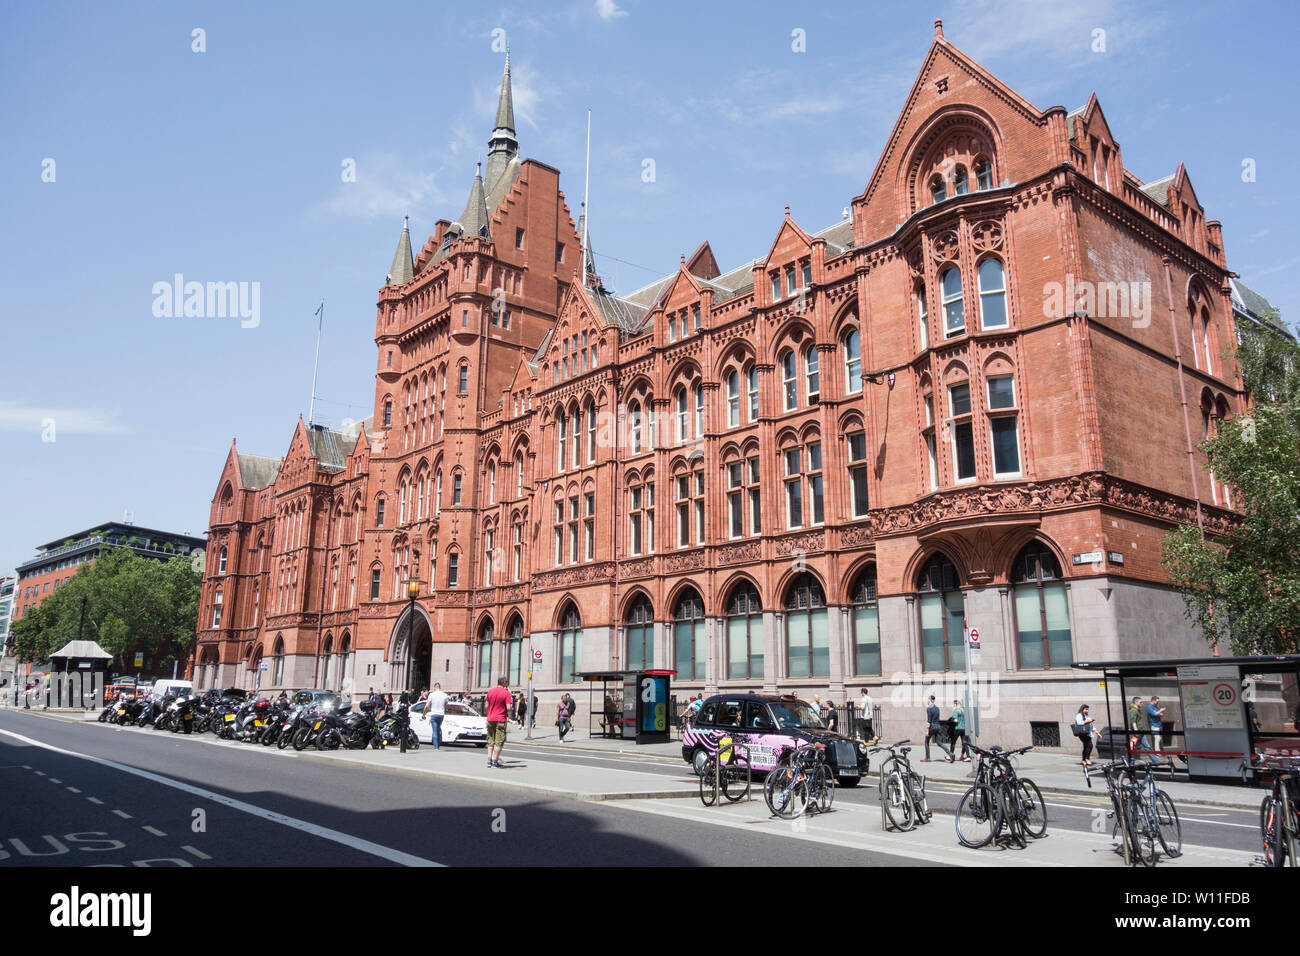 Holborn Bars, the former Prudential Assurance Building designed by Alfred Waterhouse, Holborn, London, UK Stock Photo